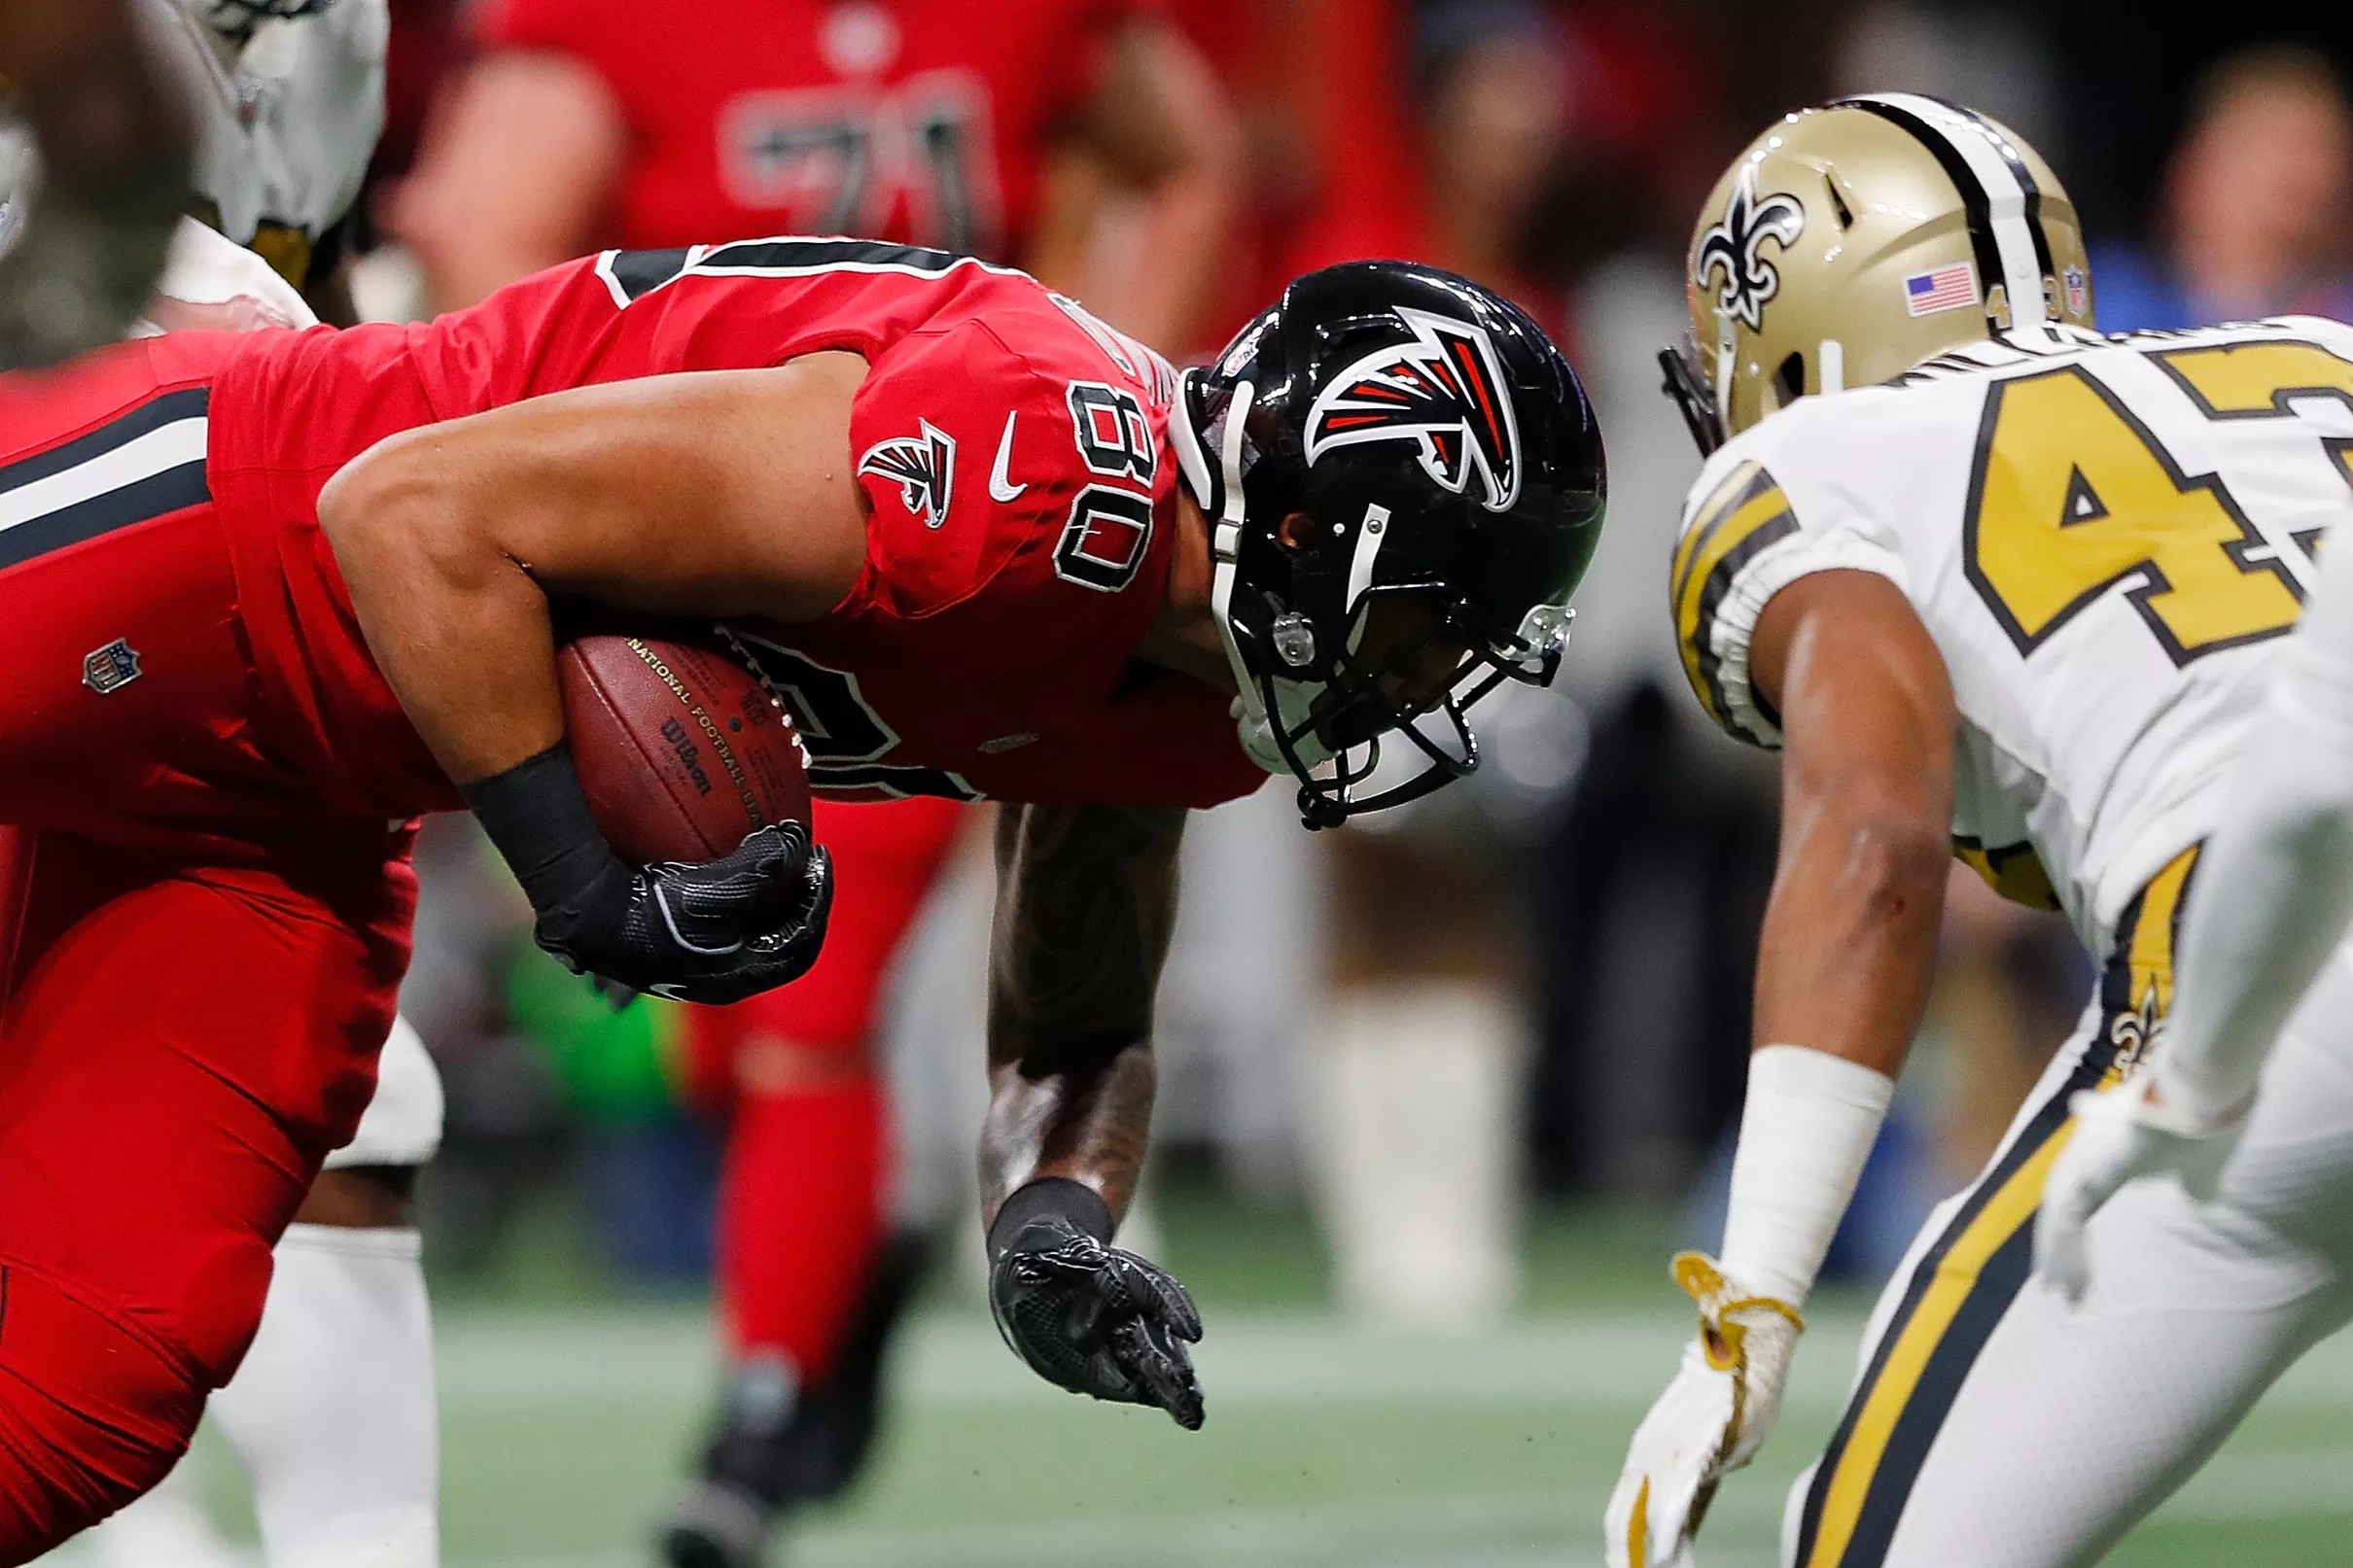 Falcons playoff picture: Atlanta’s win keeps them very much in the hunt